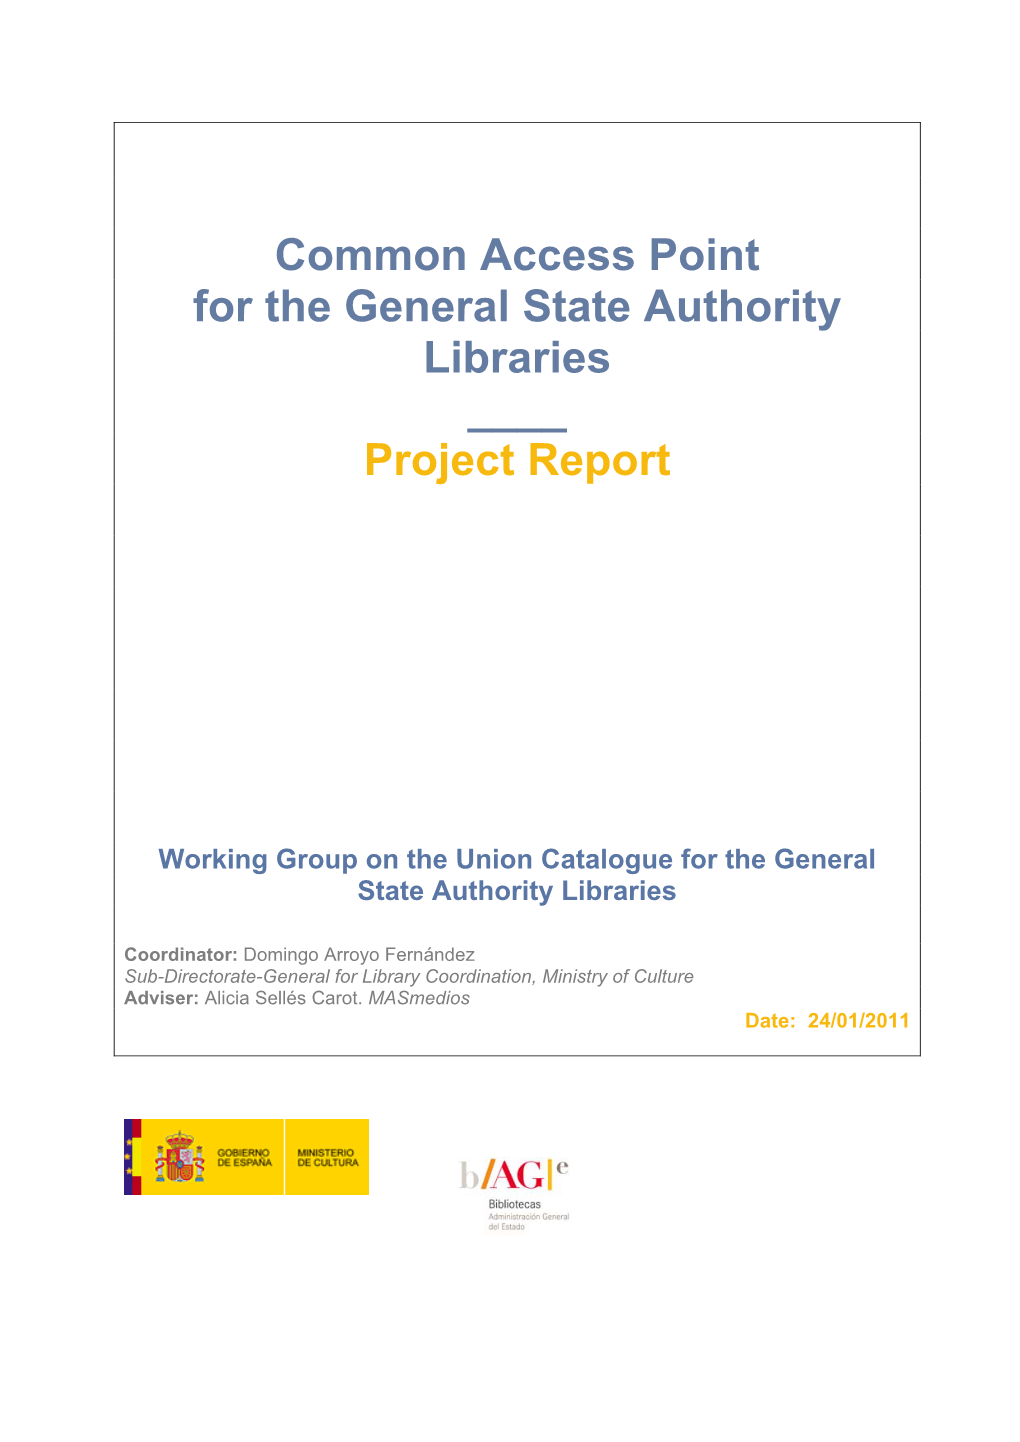 Common Access Point for the General State Authority Libraries ____ Project Report